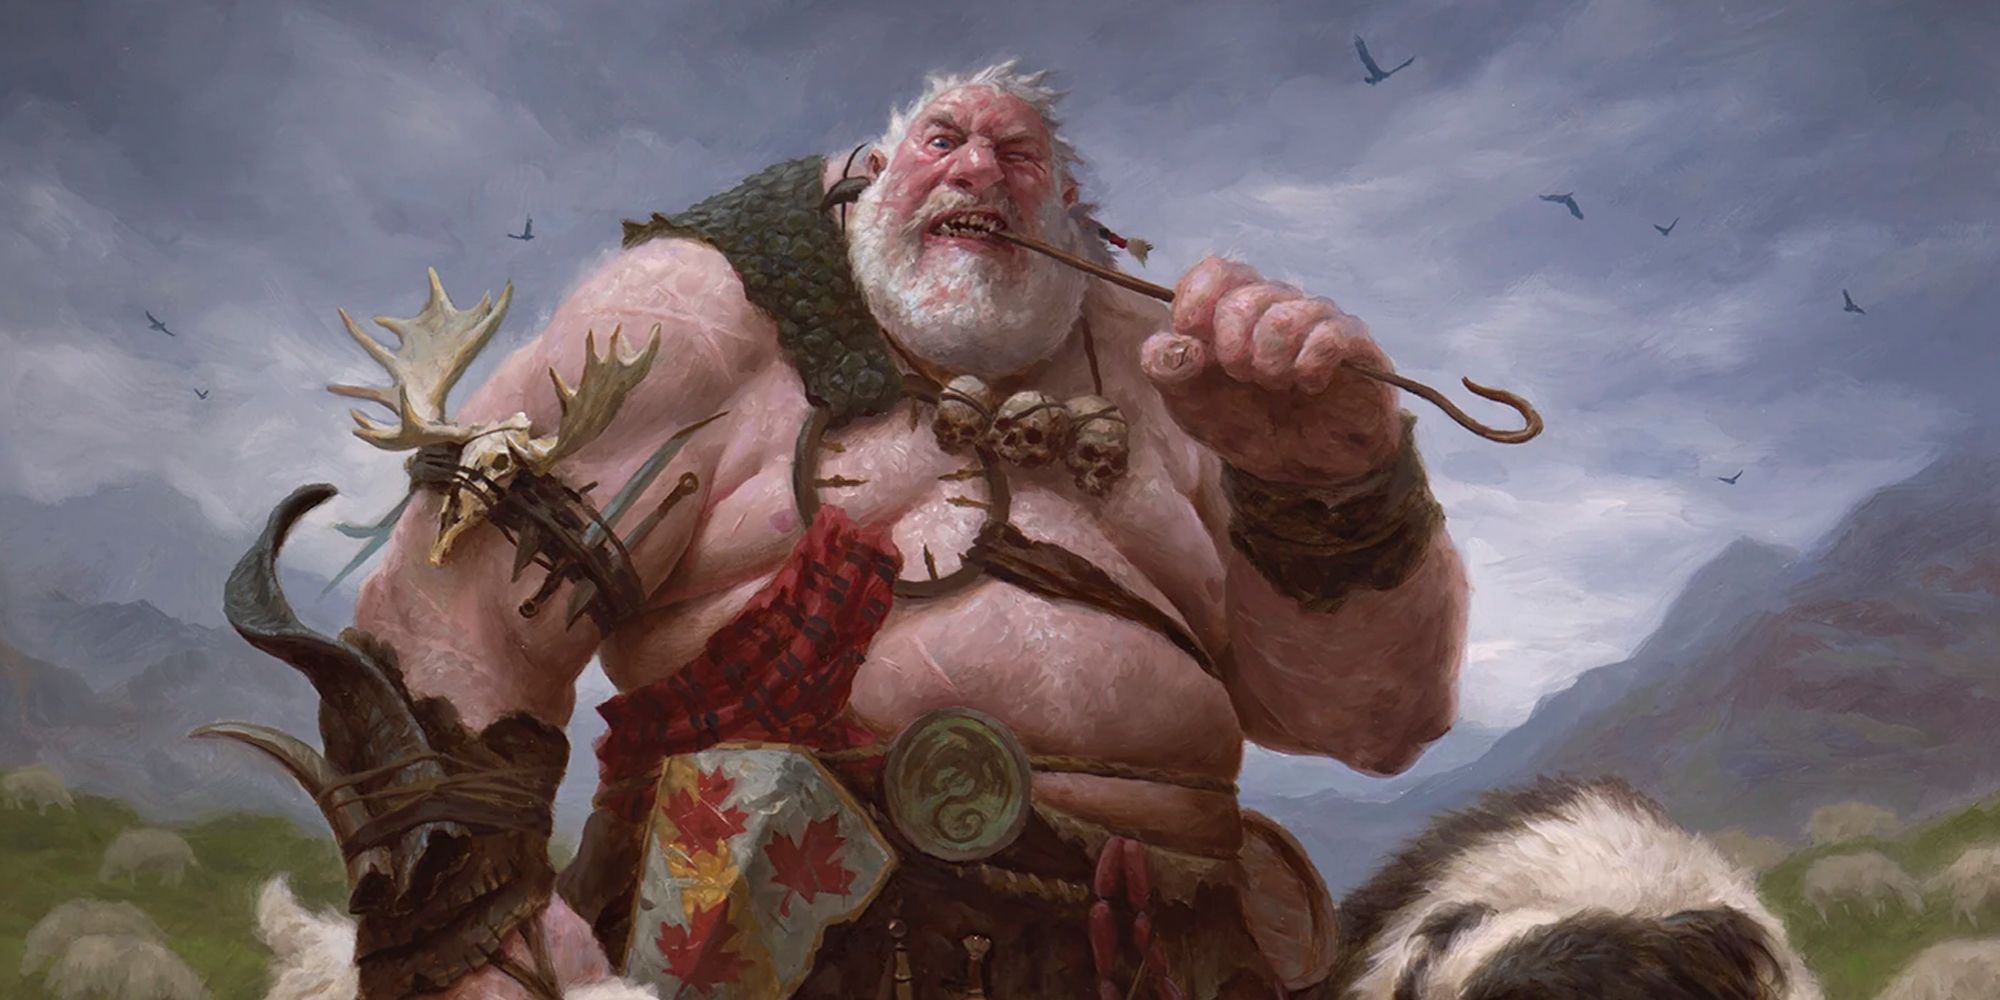 wizards of the coast - hill giant art, released for magic the gathering